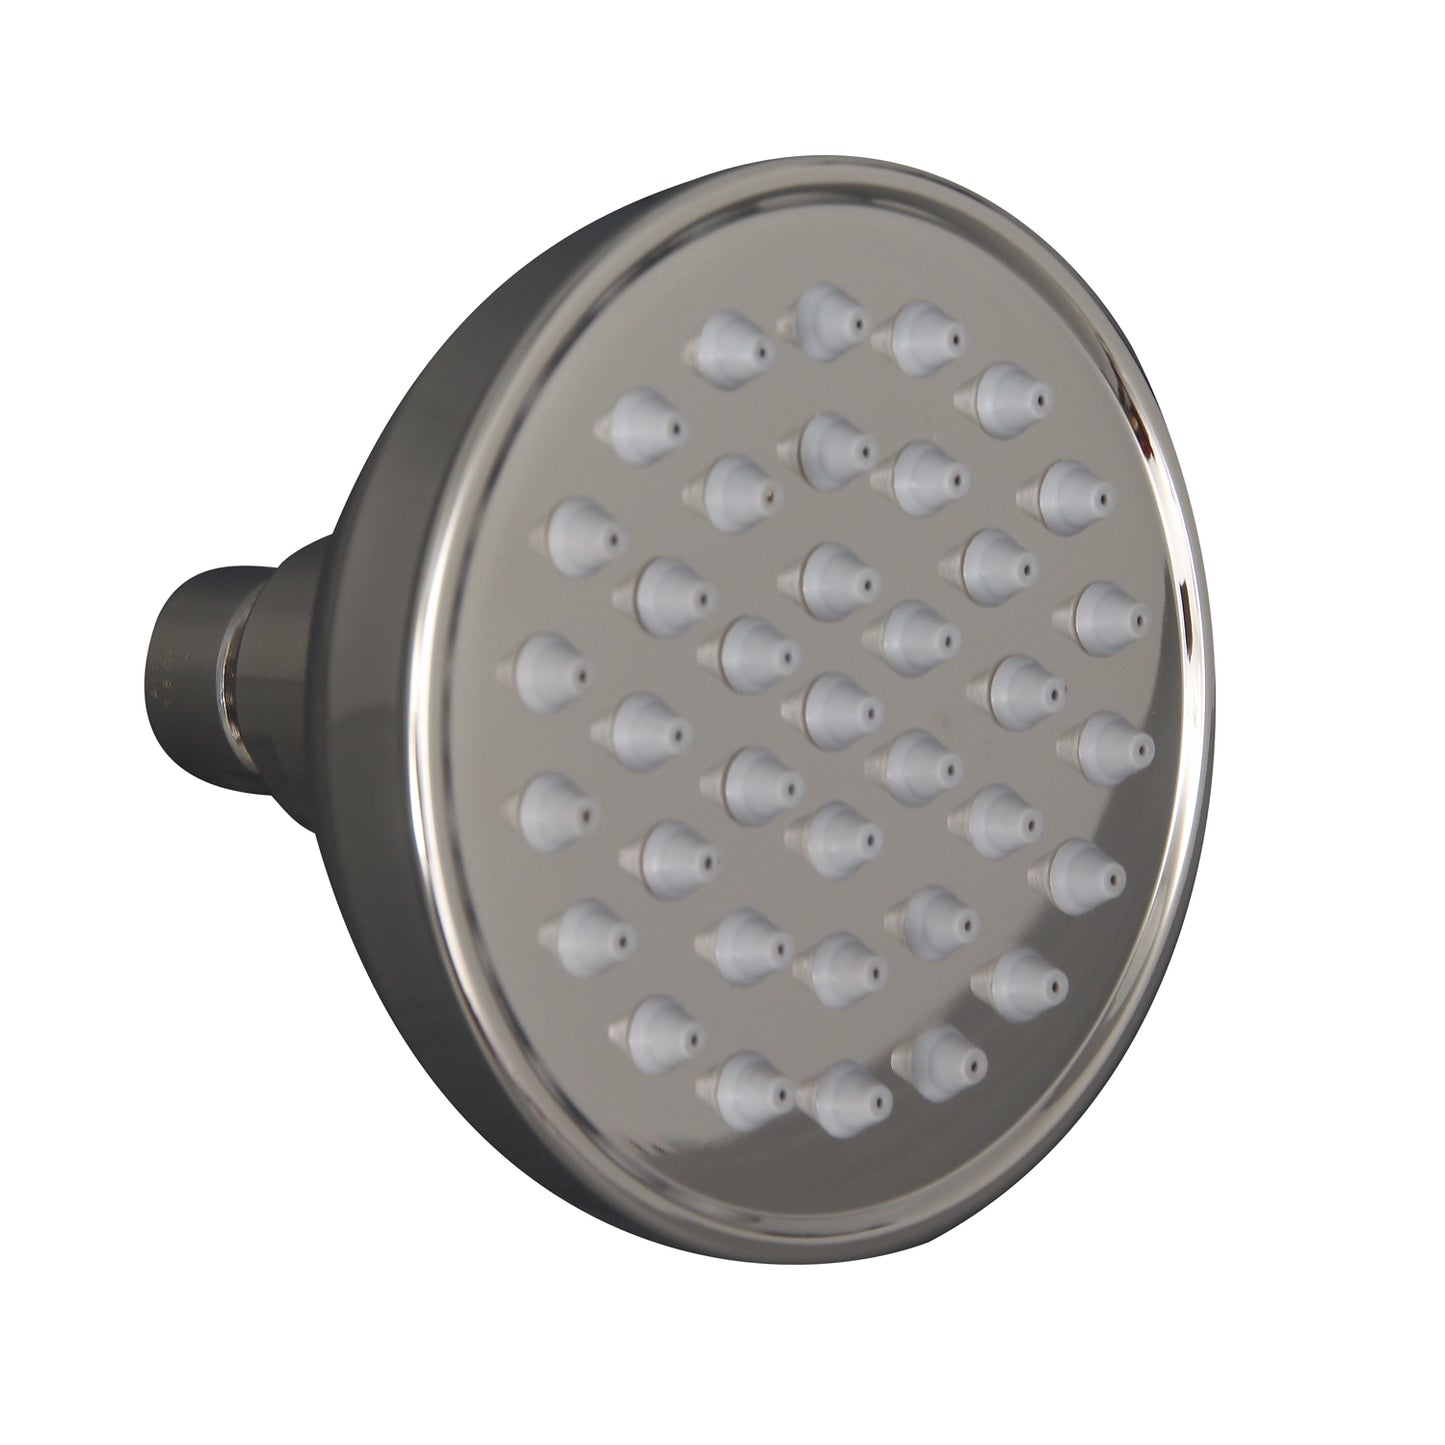 Trapp 4" Round Silicon Nozzle Rainfall Shower Head Polished Nickel